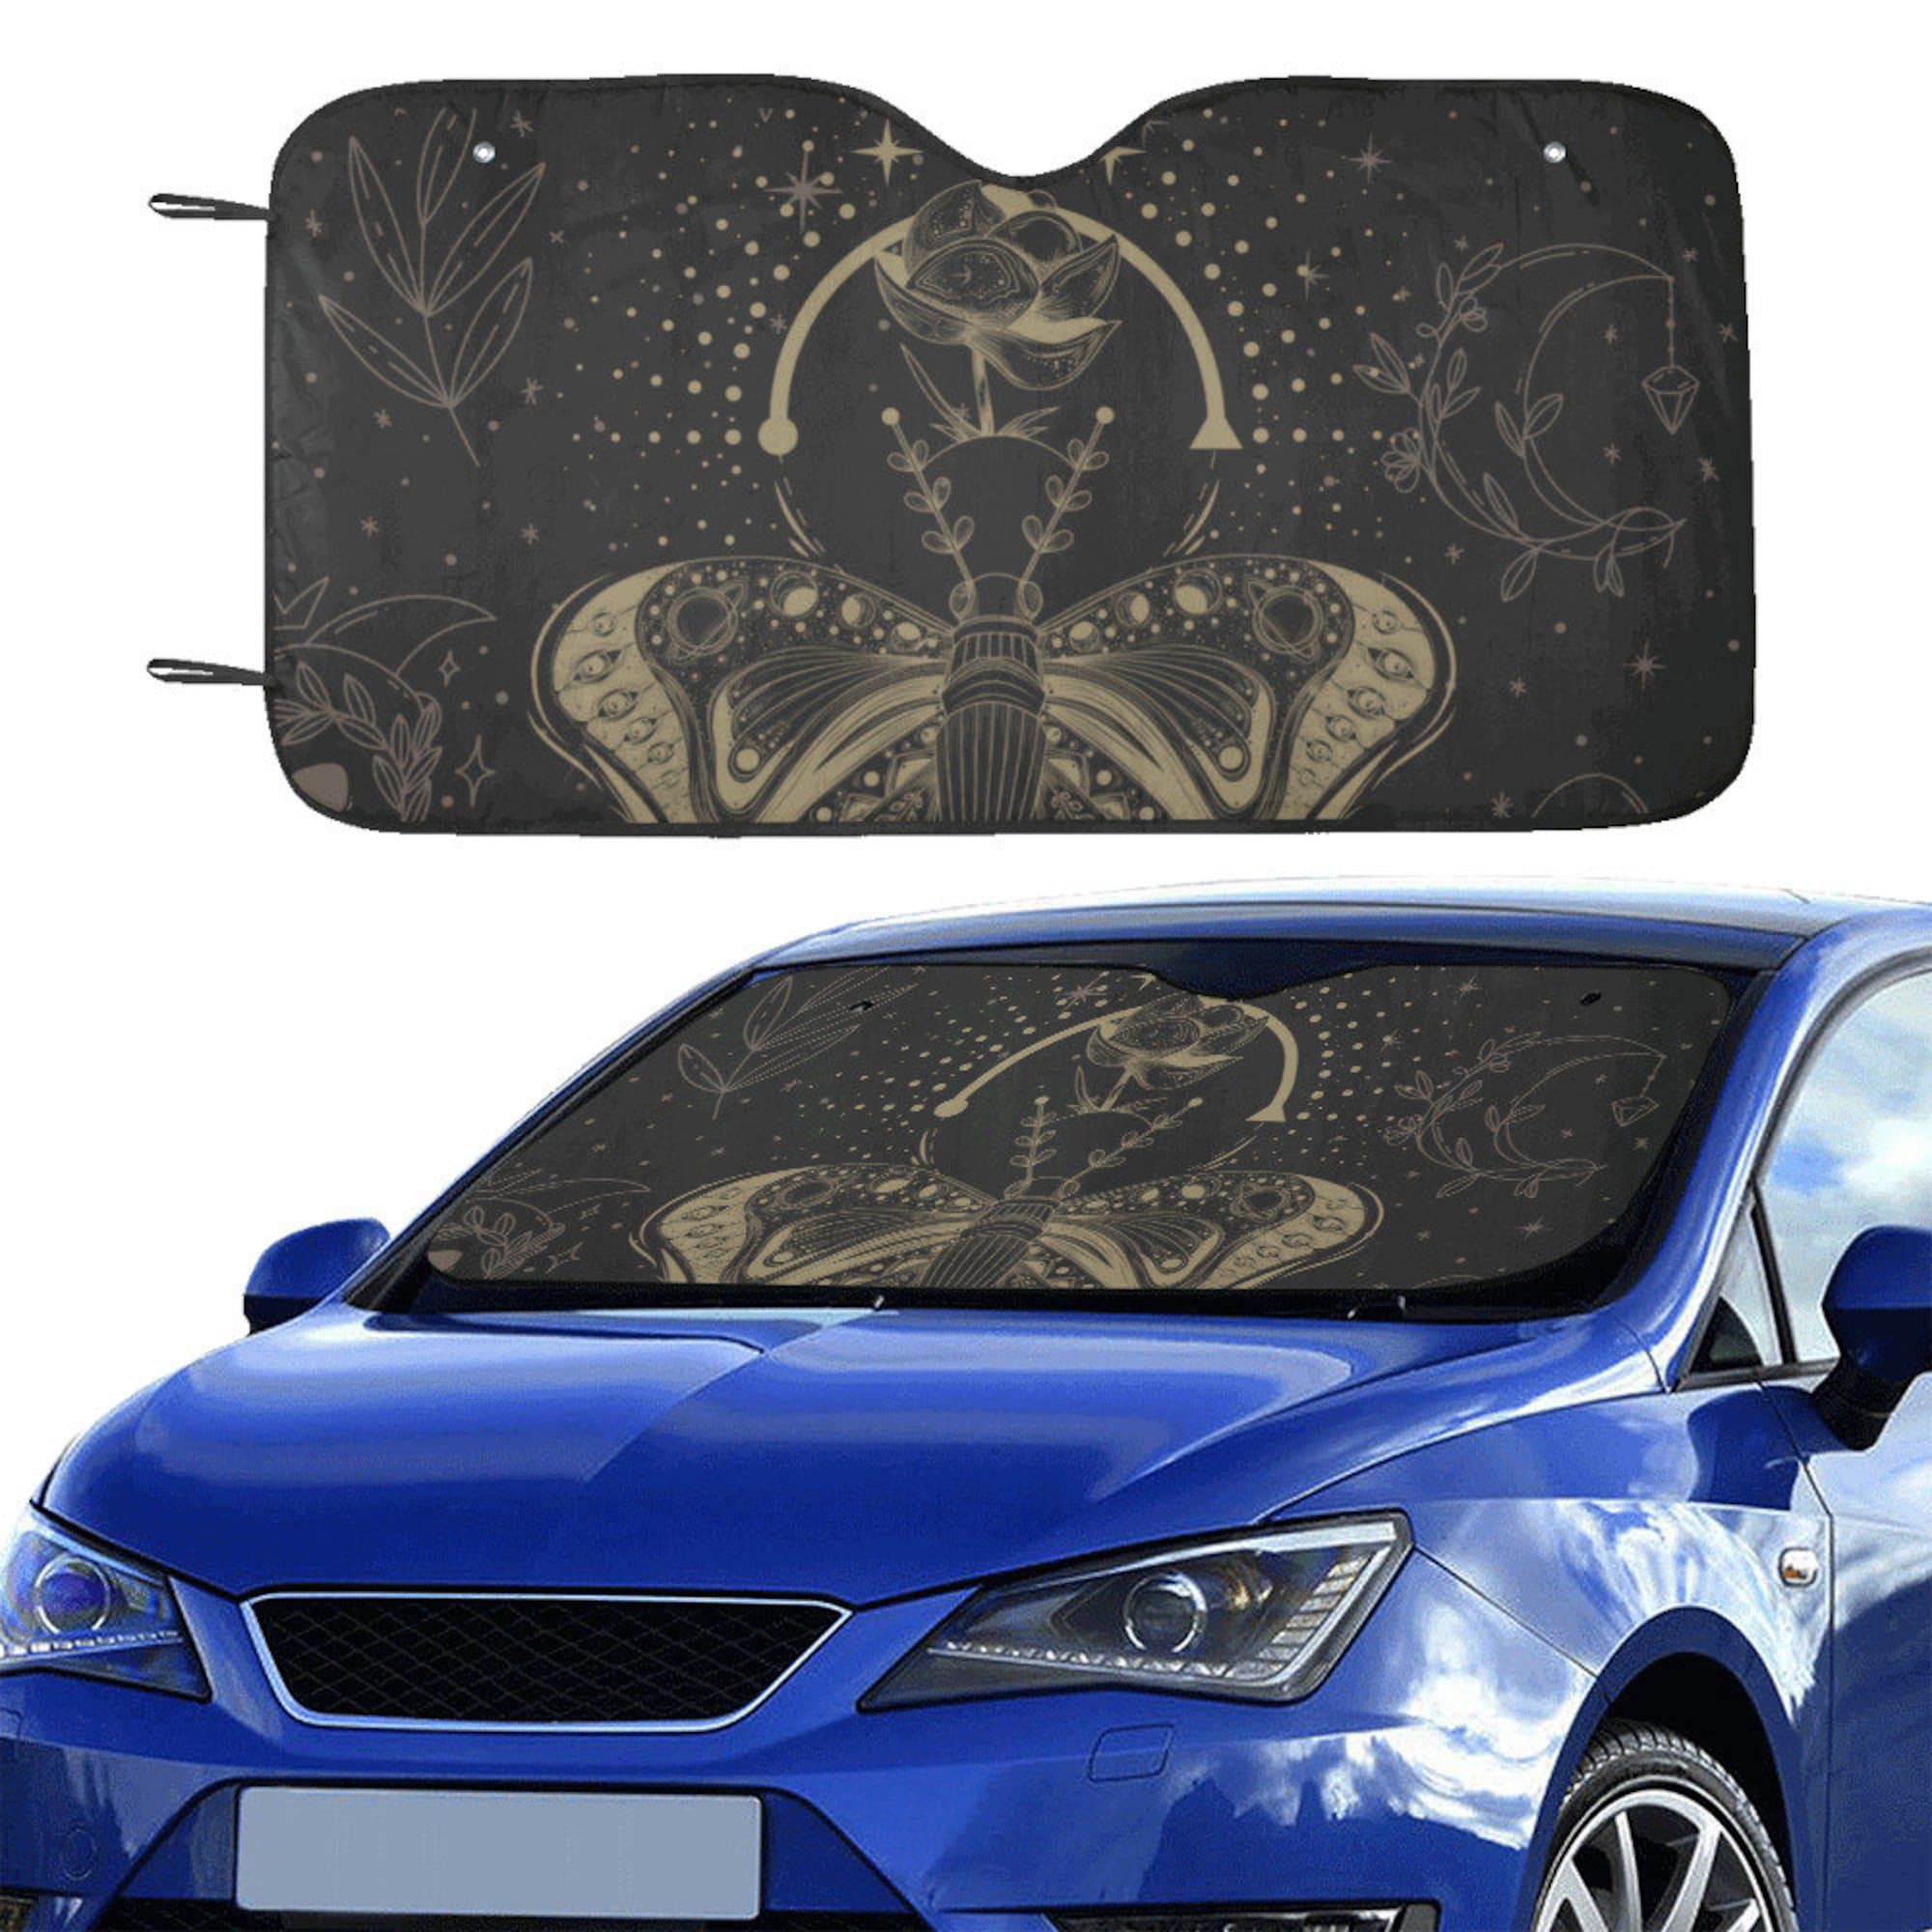 Witch Moth Moonphase Lotus Car sunshade for windshield